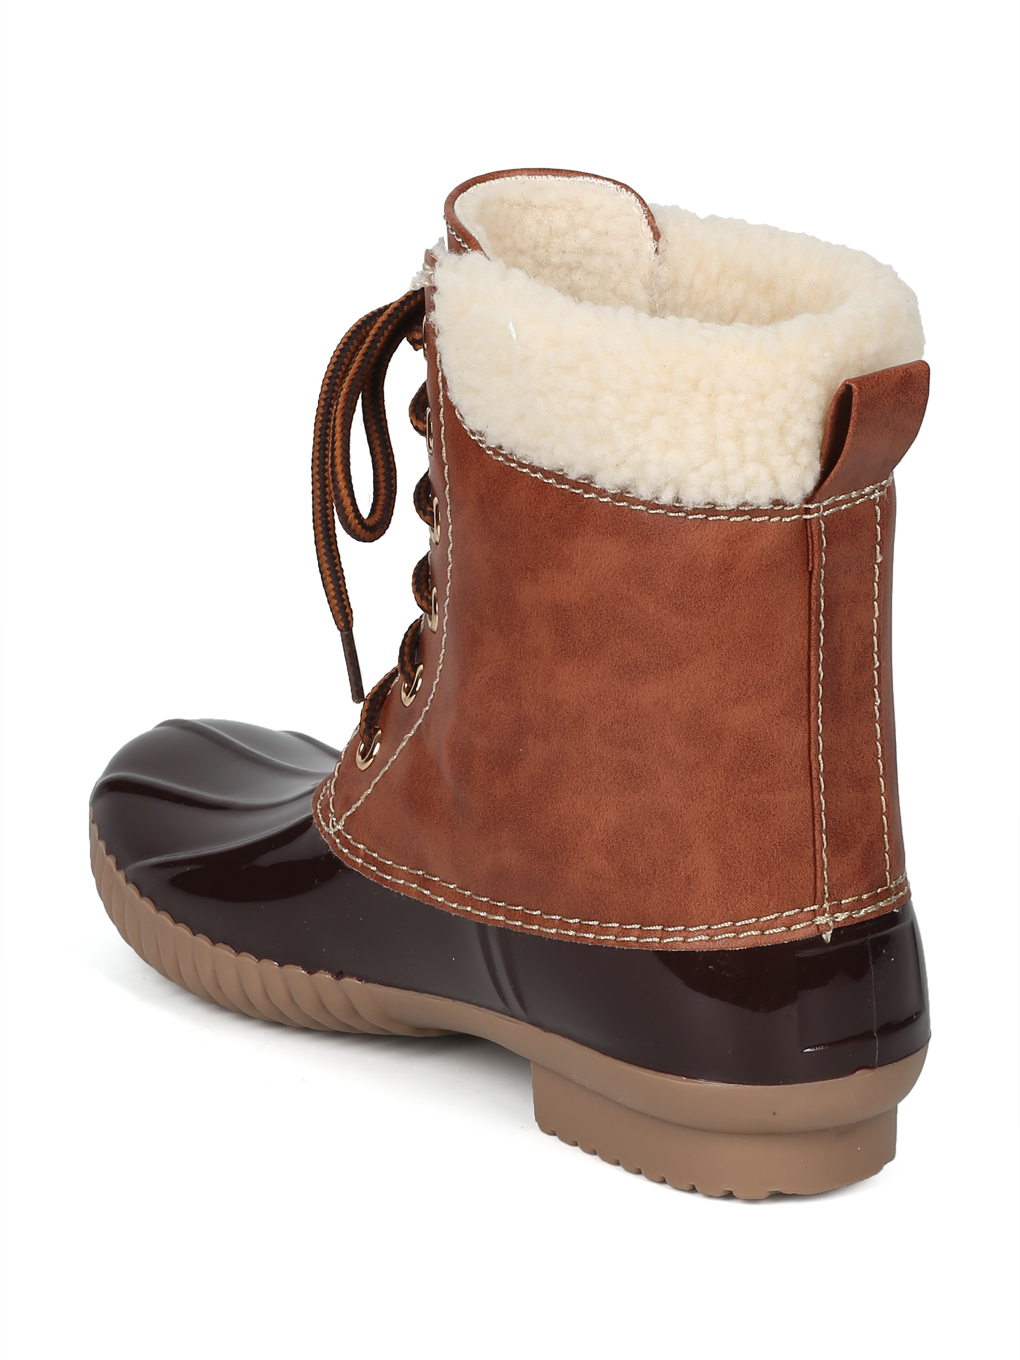 New Women Two Tone Faux Shearling Lined Lace Up Duck Boot - 17990 By Yoki - image 3 of 6